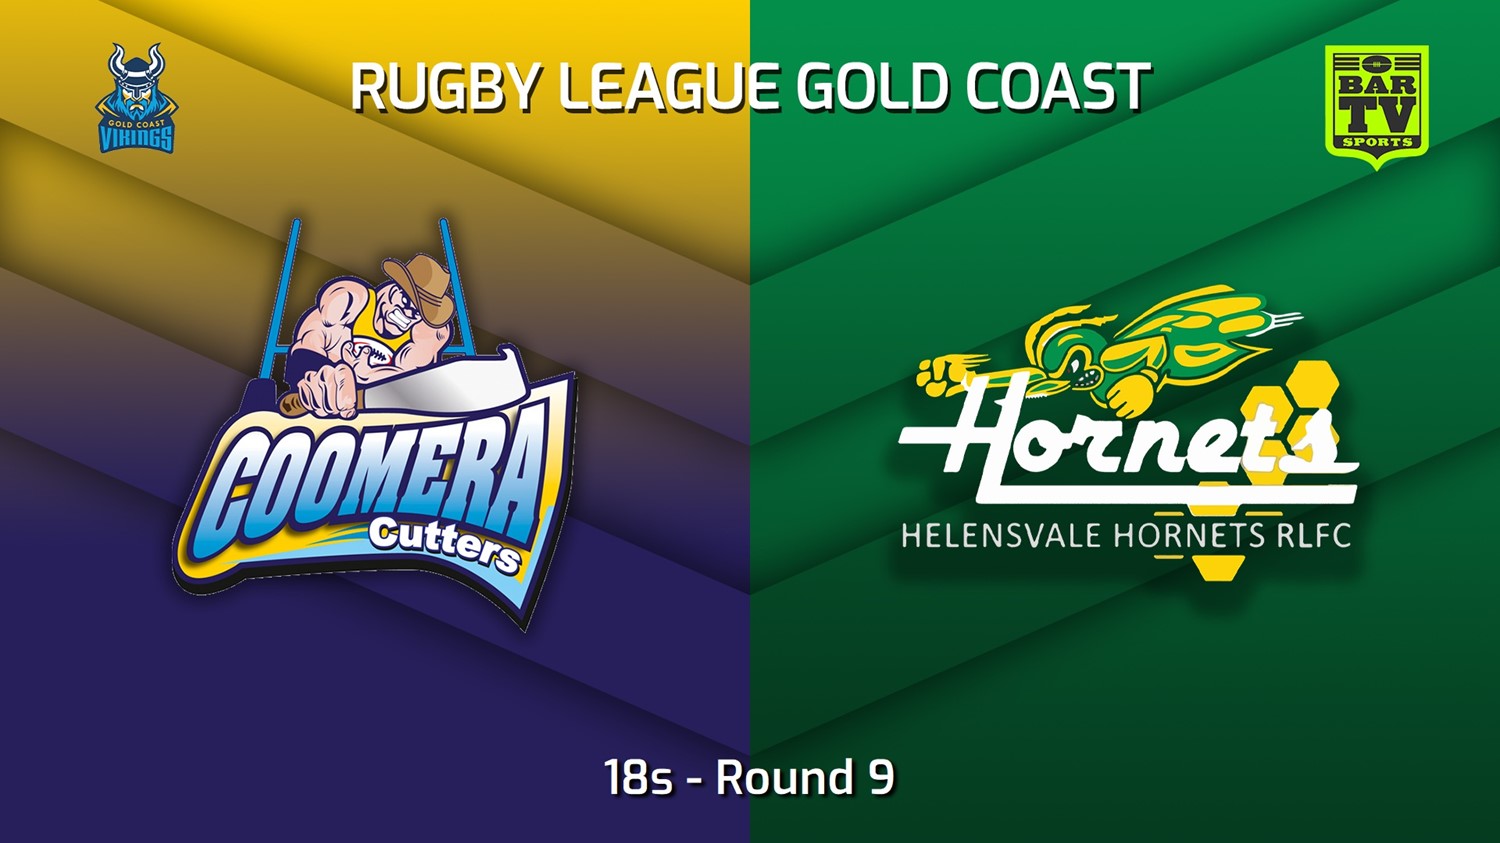 230624-Gold Coast Round 9 - 18s - Coomera Cutters v Helensvale Hornets Slate Image